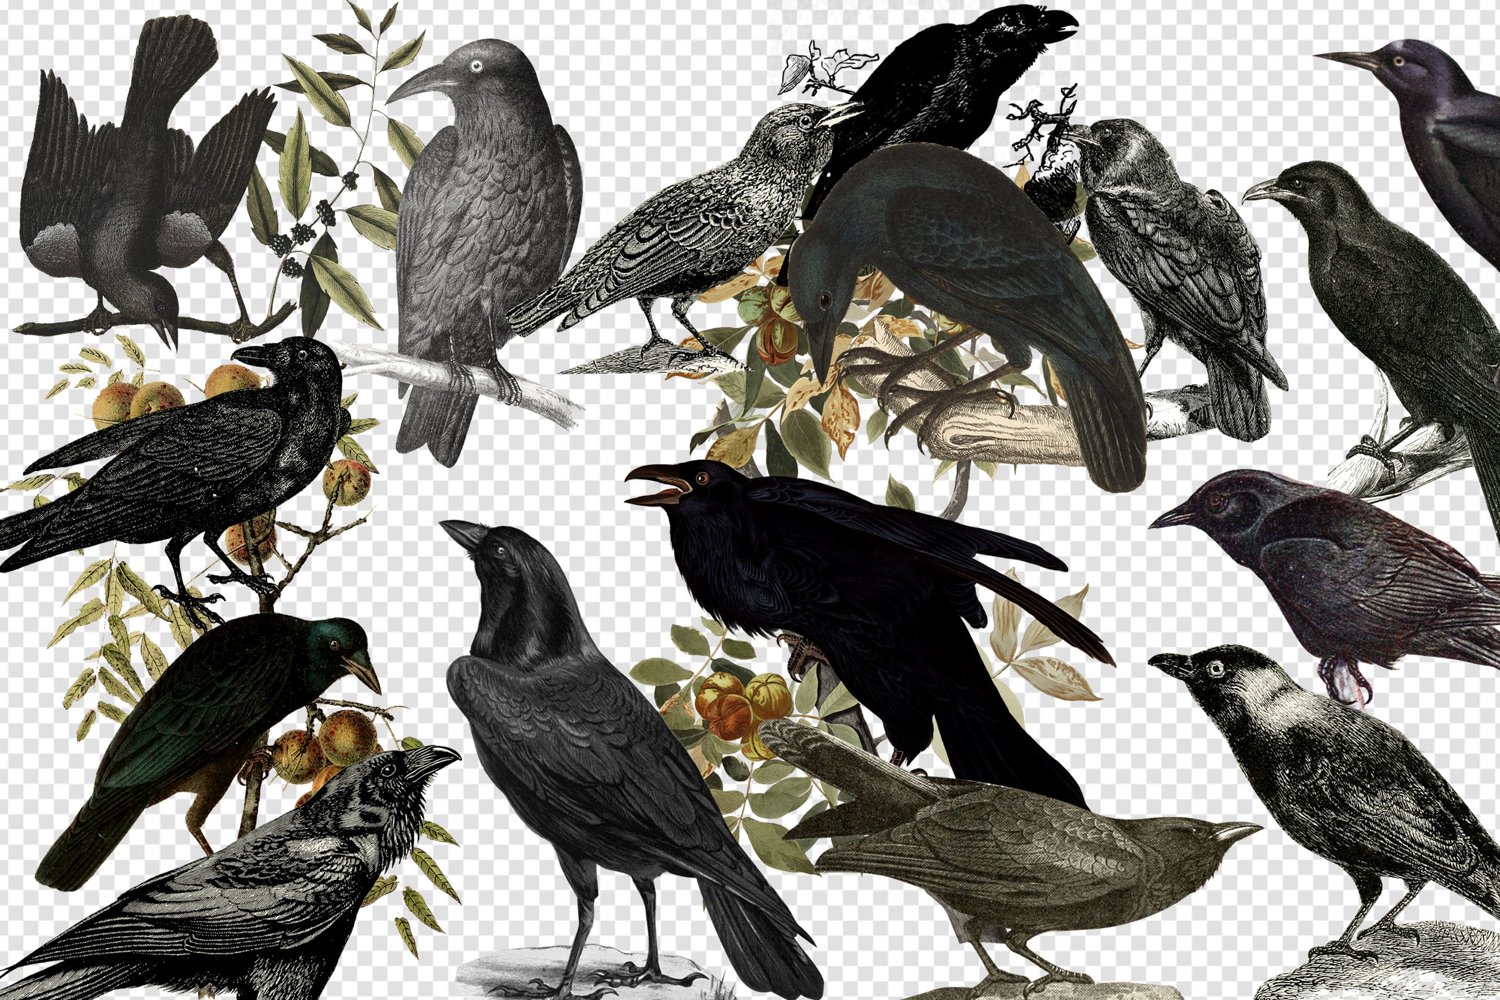 Each bird is in PNG format with transparent backgrounds,.